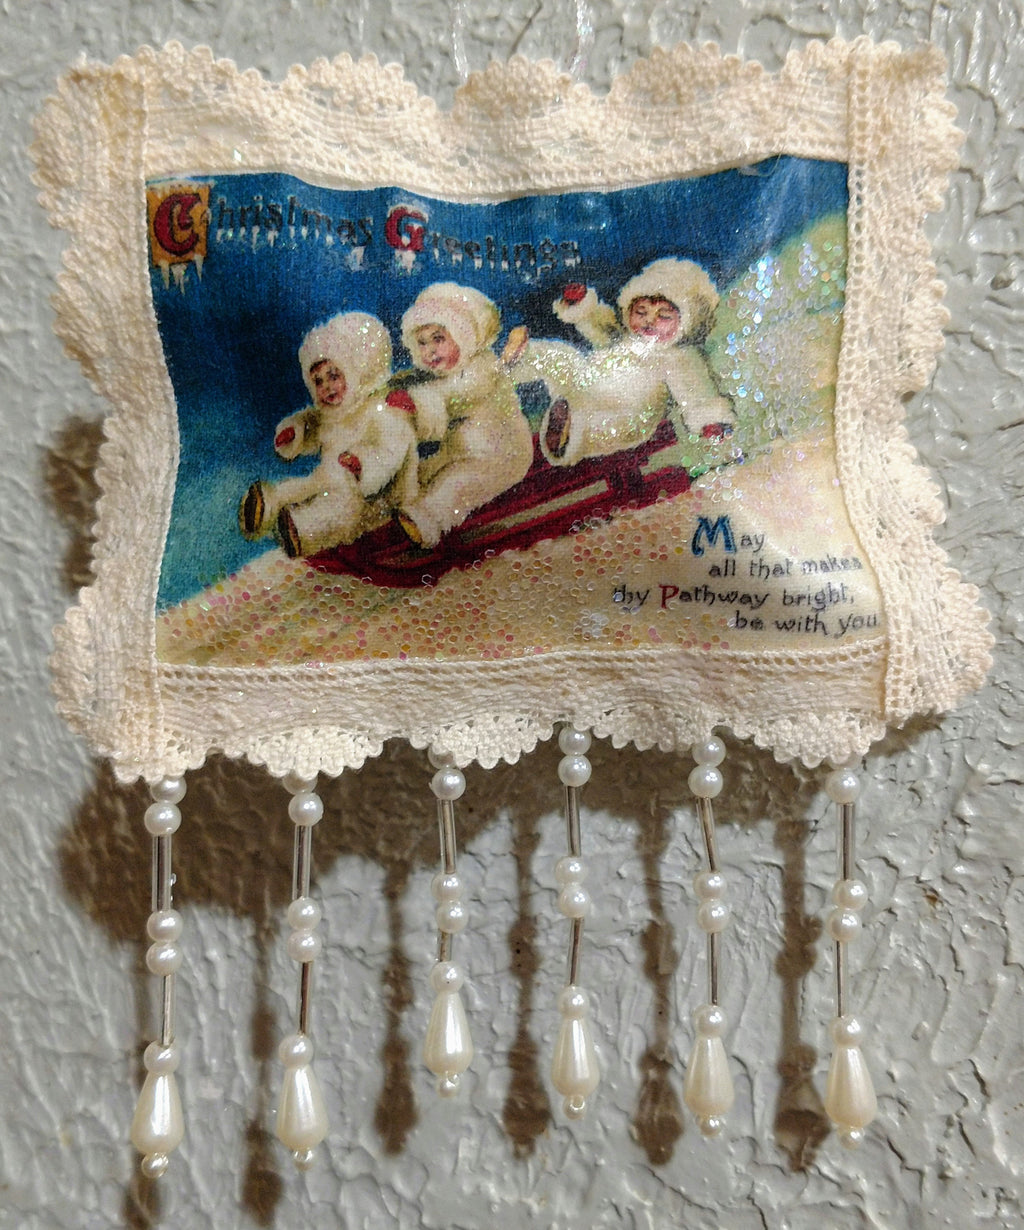 Snow Babies Greeting Scented Sachet Ornament - One of a Kind!-Roses And Teacups